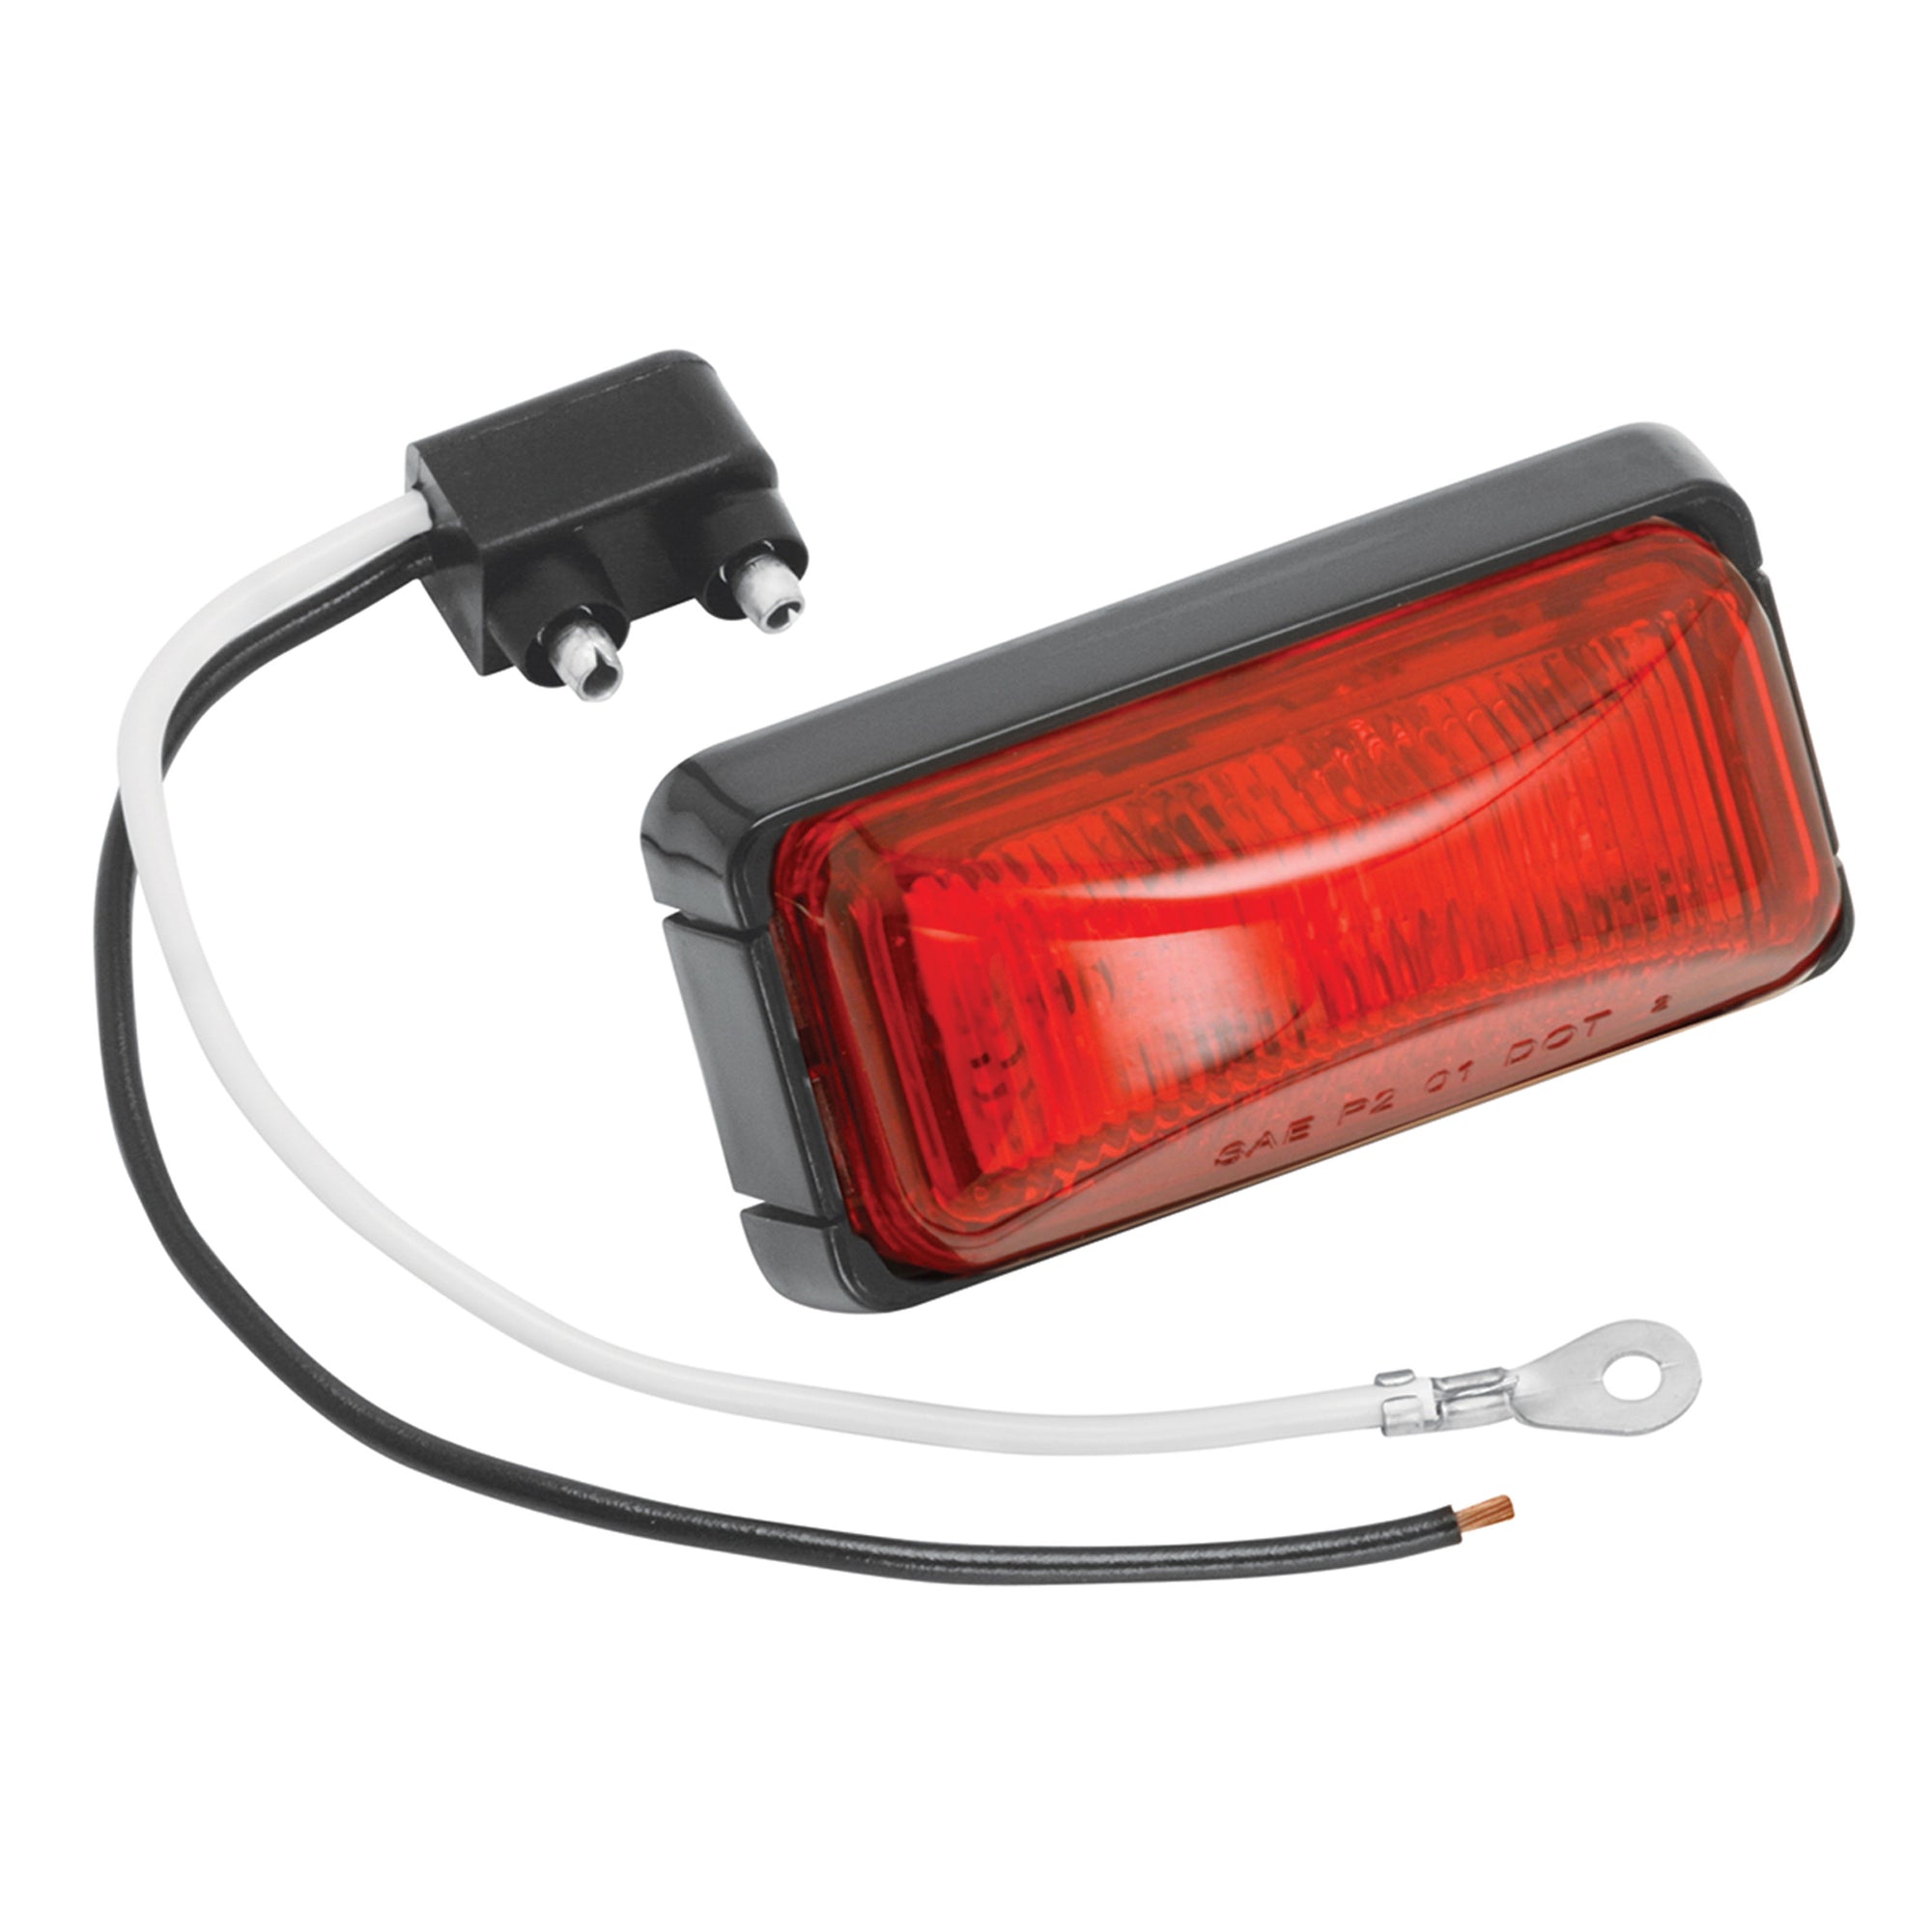 Bargman Company 42-37-401 Clearance Light Module LED Red